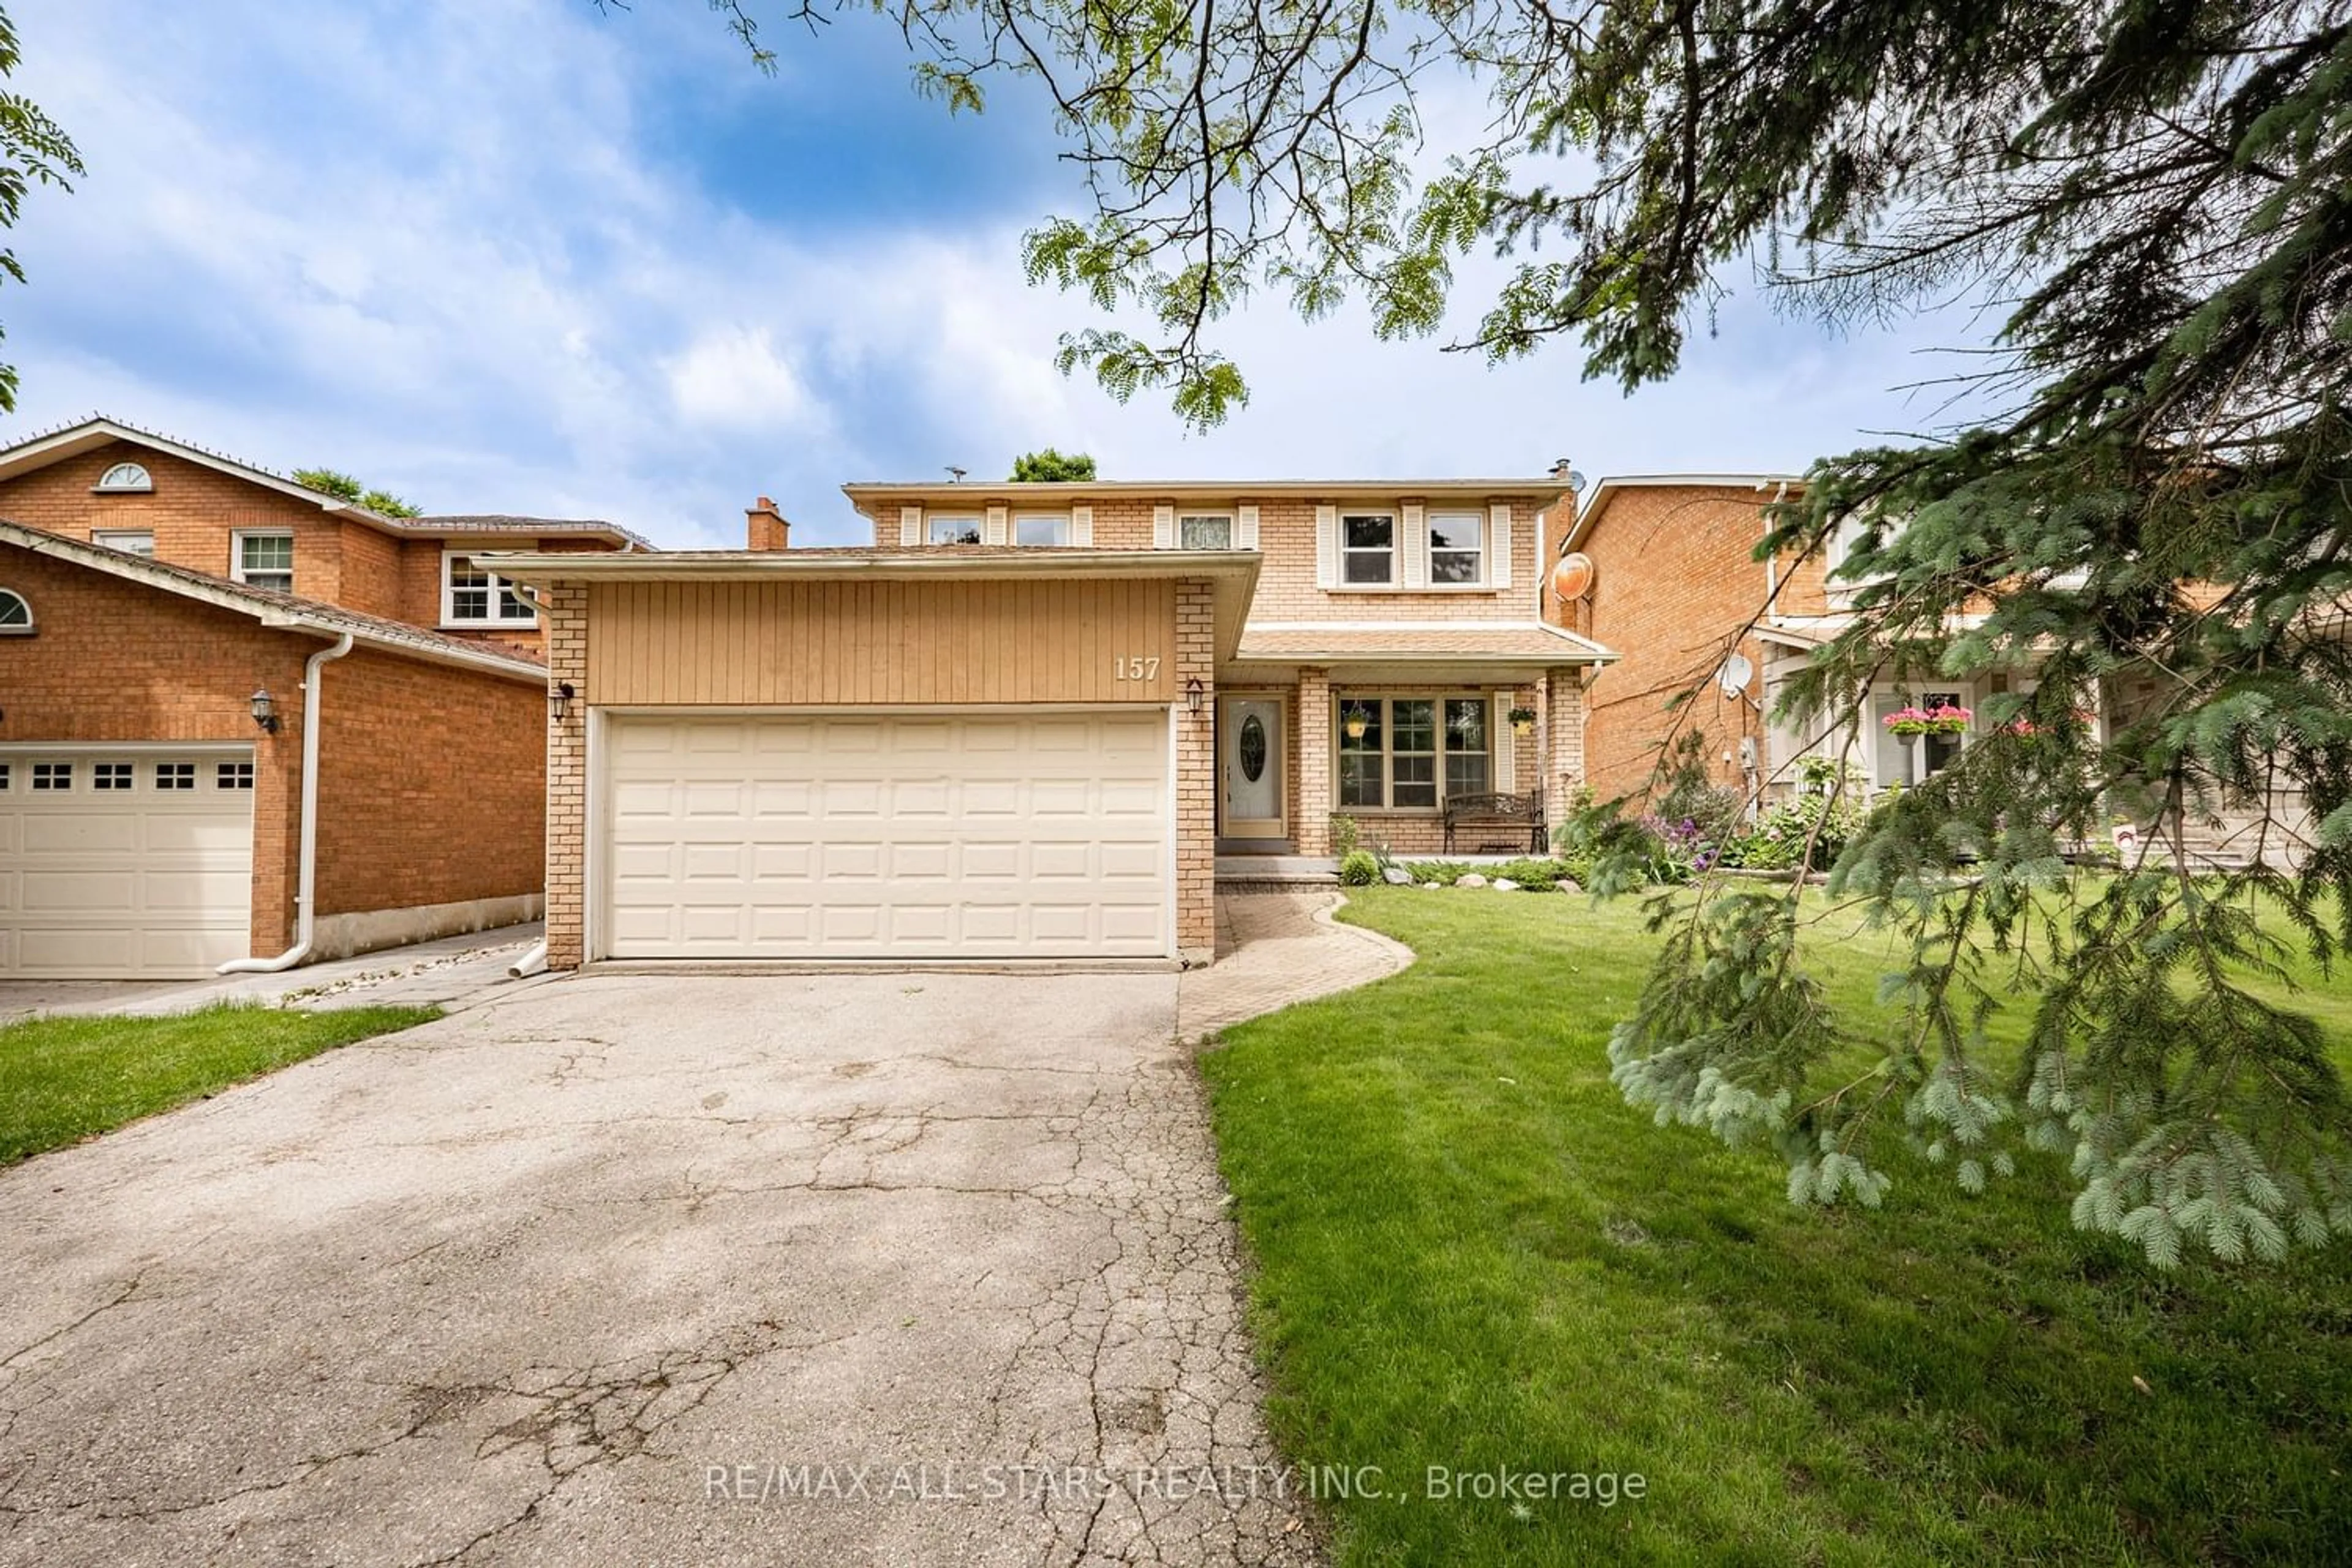 Home with brick exterior material for 157 Alderwood St, Whitchurch-Stouffville Ontario L4A 5E5